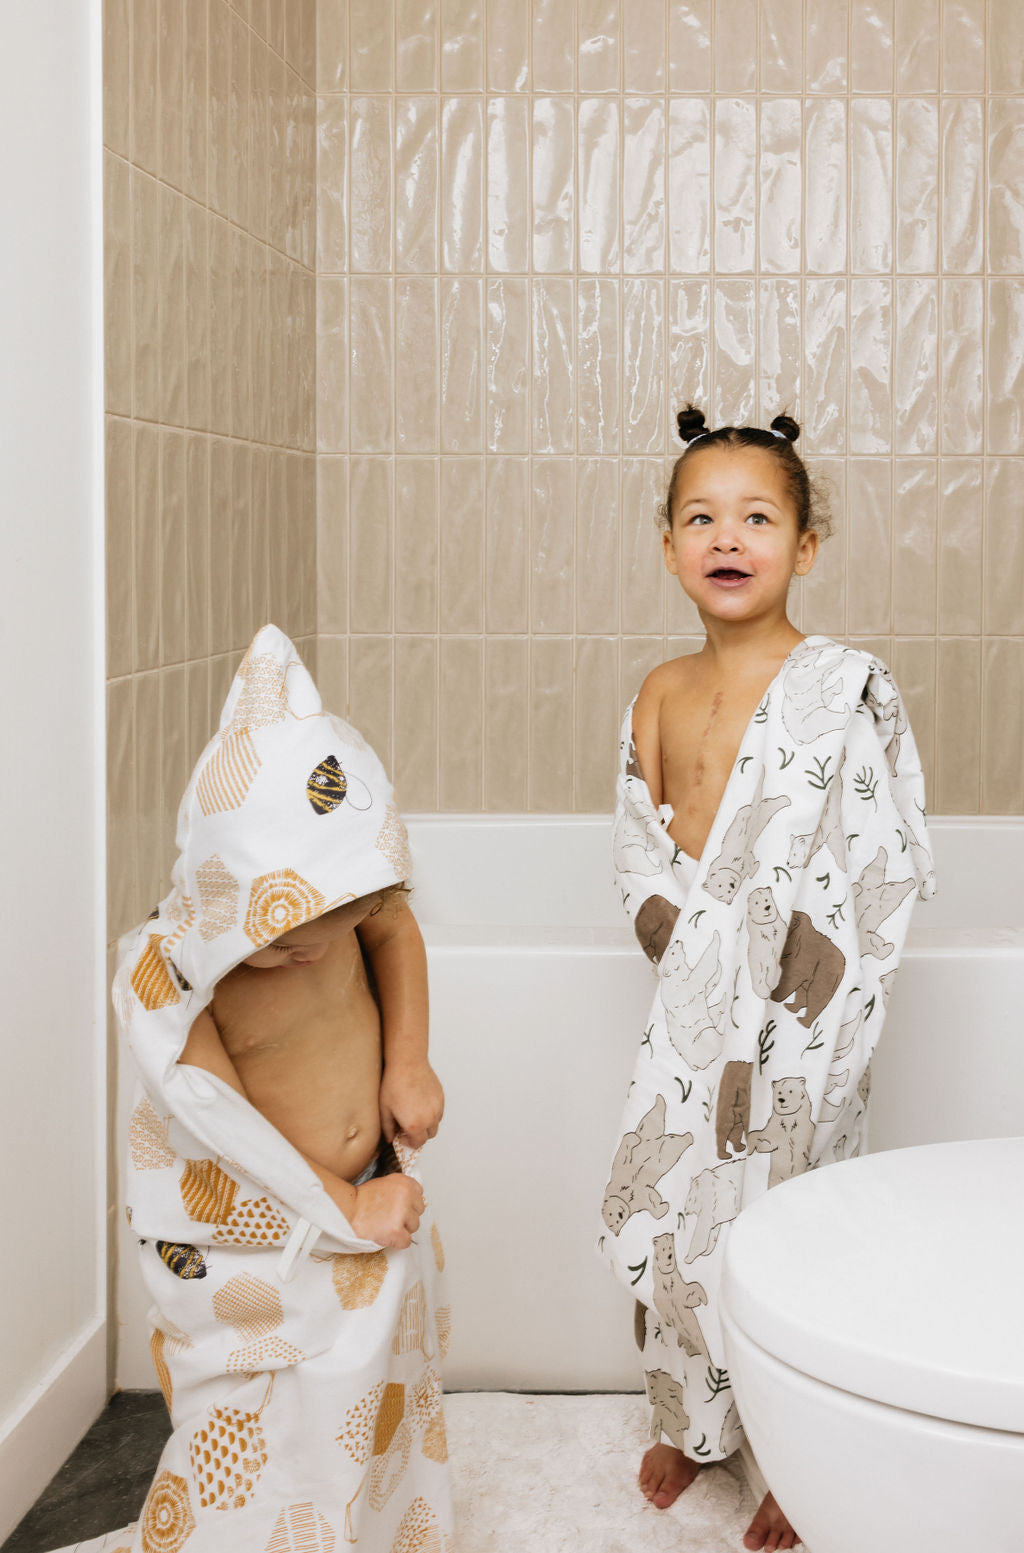 Two children wrapped in hooded towels in the bathroom